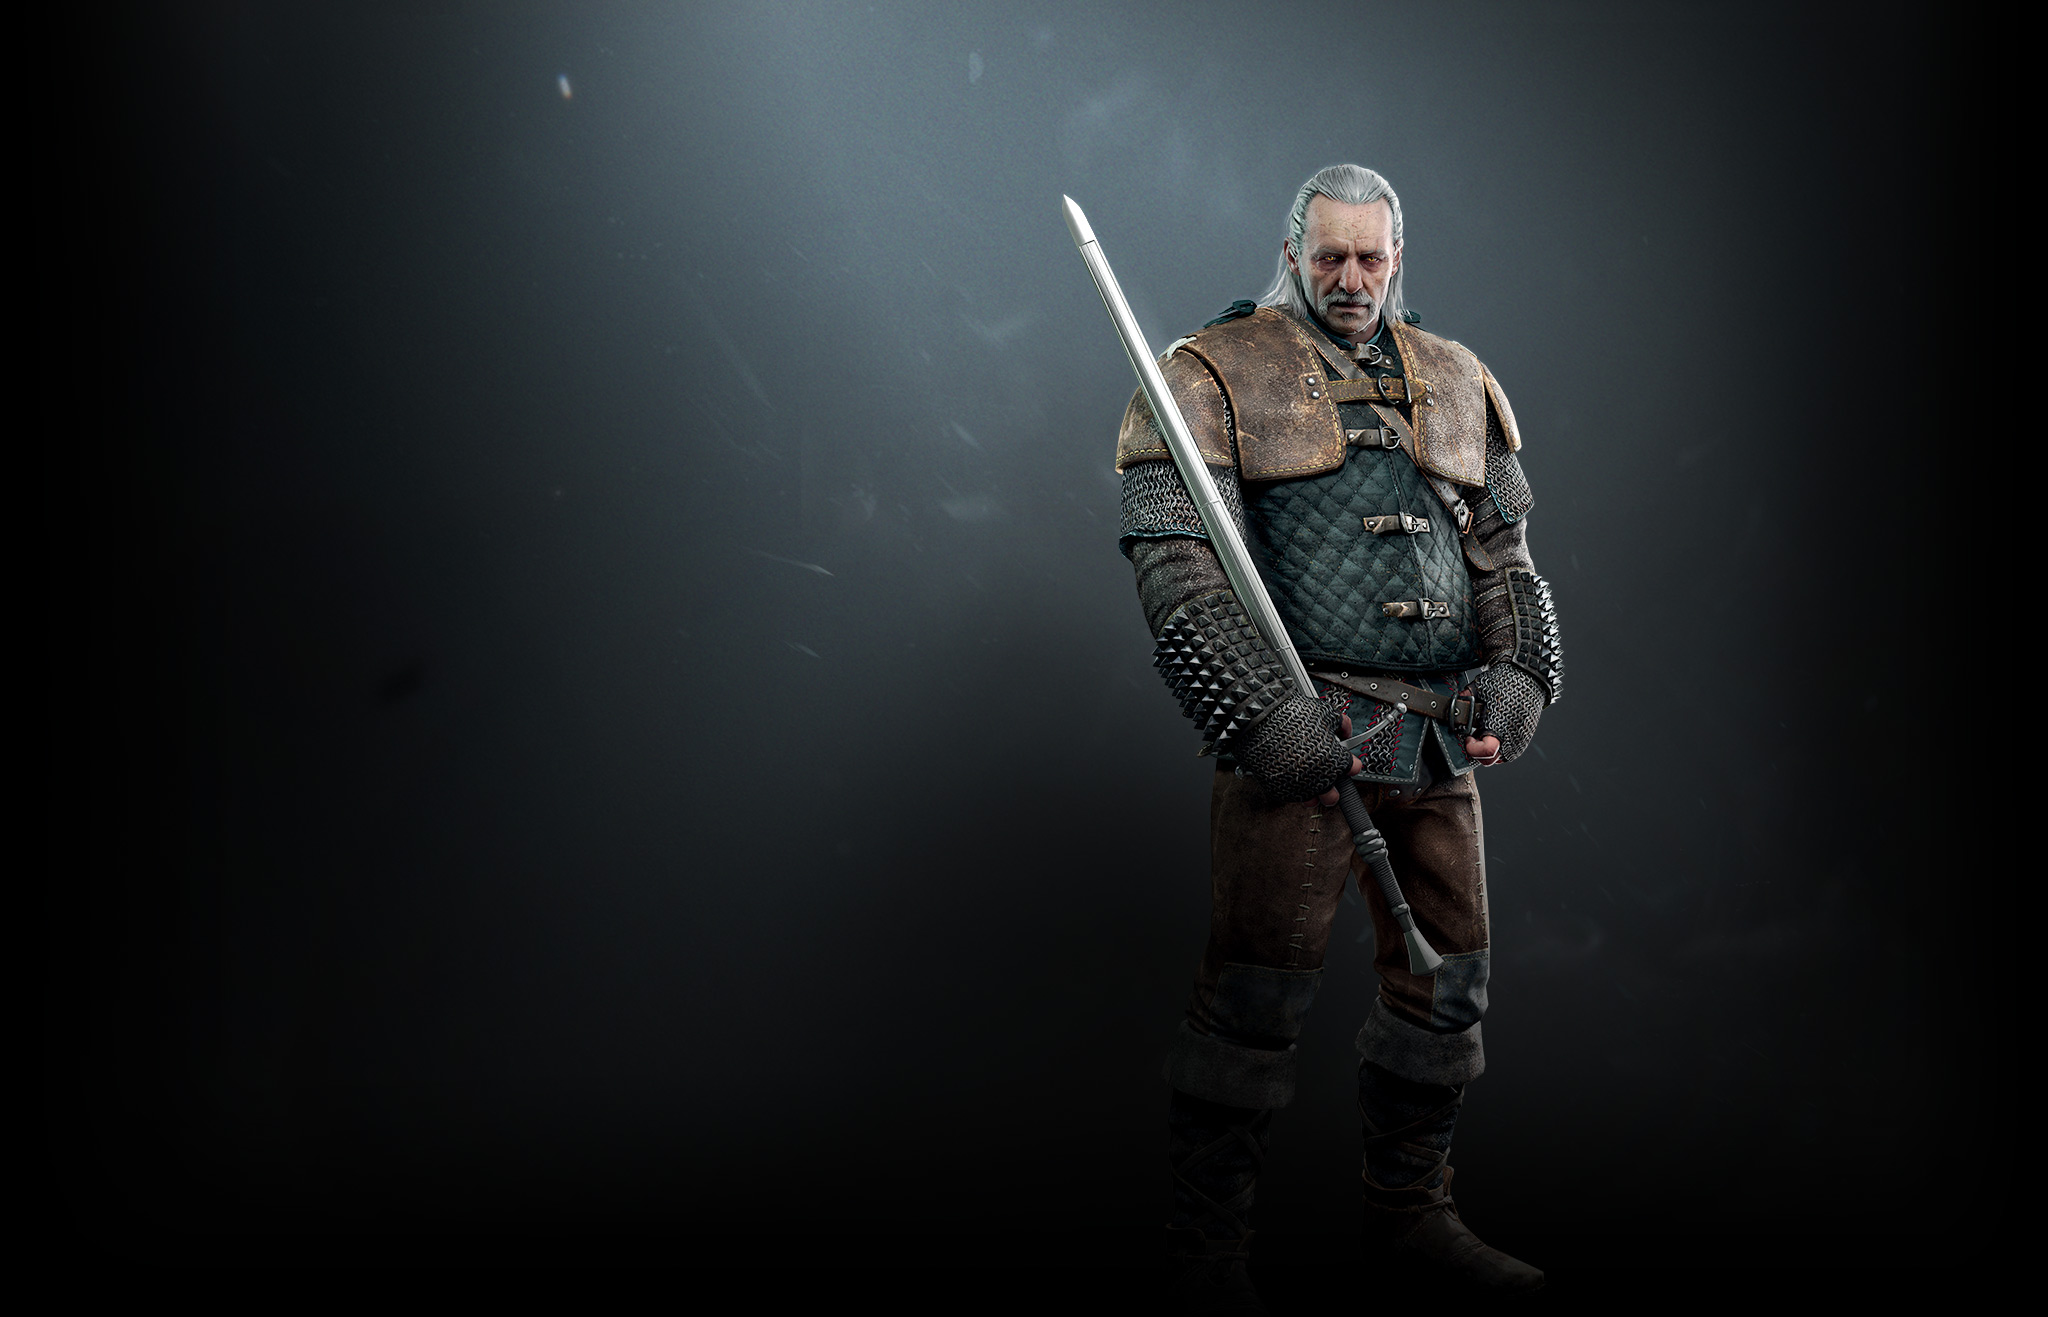 Games The Witcher - Witcher Vesemir - HD Wallpaper 